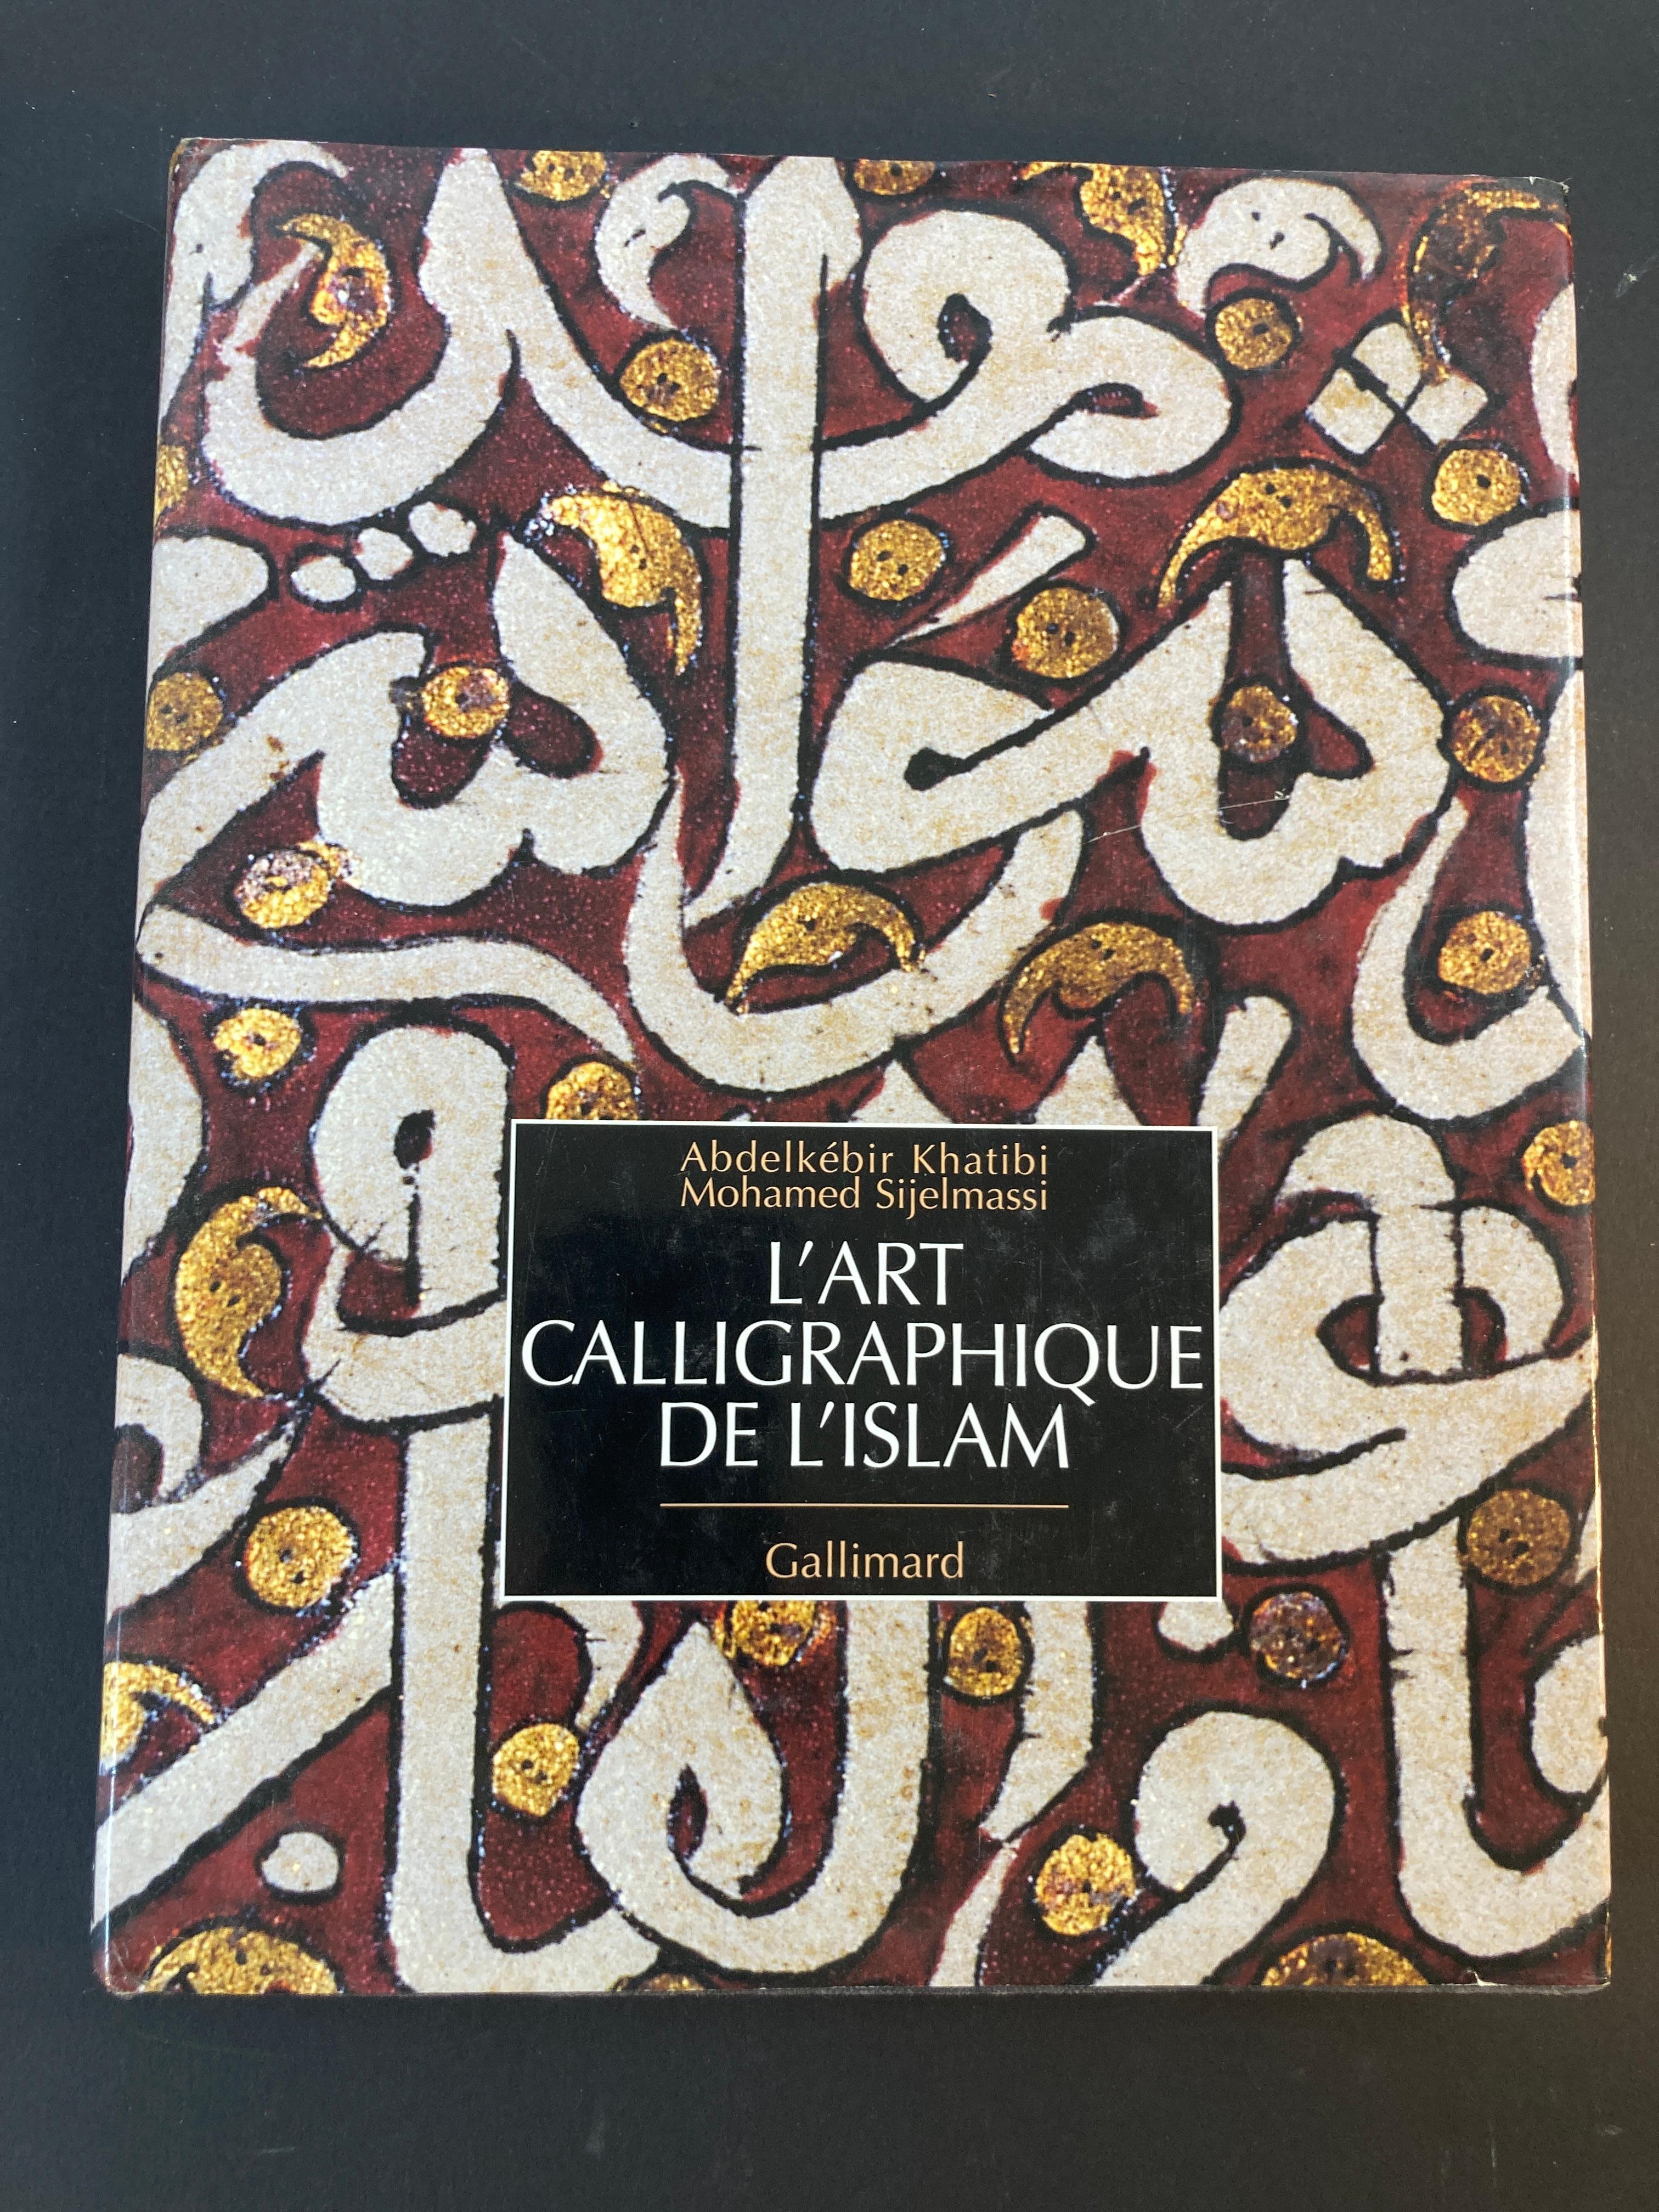 L'art calligraphique de l'Islam hardcover art book.
Calligraphy Art in Islam, French edition.
French Edition by Abdelkebir Khatibi.
Large wonderful book about calligraphy in Islam.
Publisher ? : ? Gallimard; January 1, 1994.
Language ? : ?